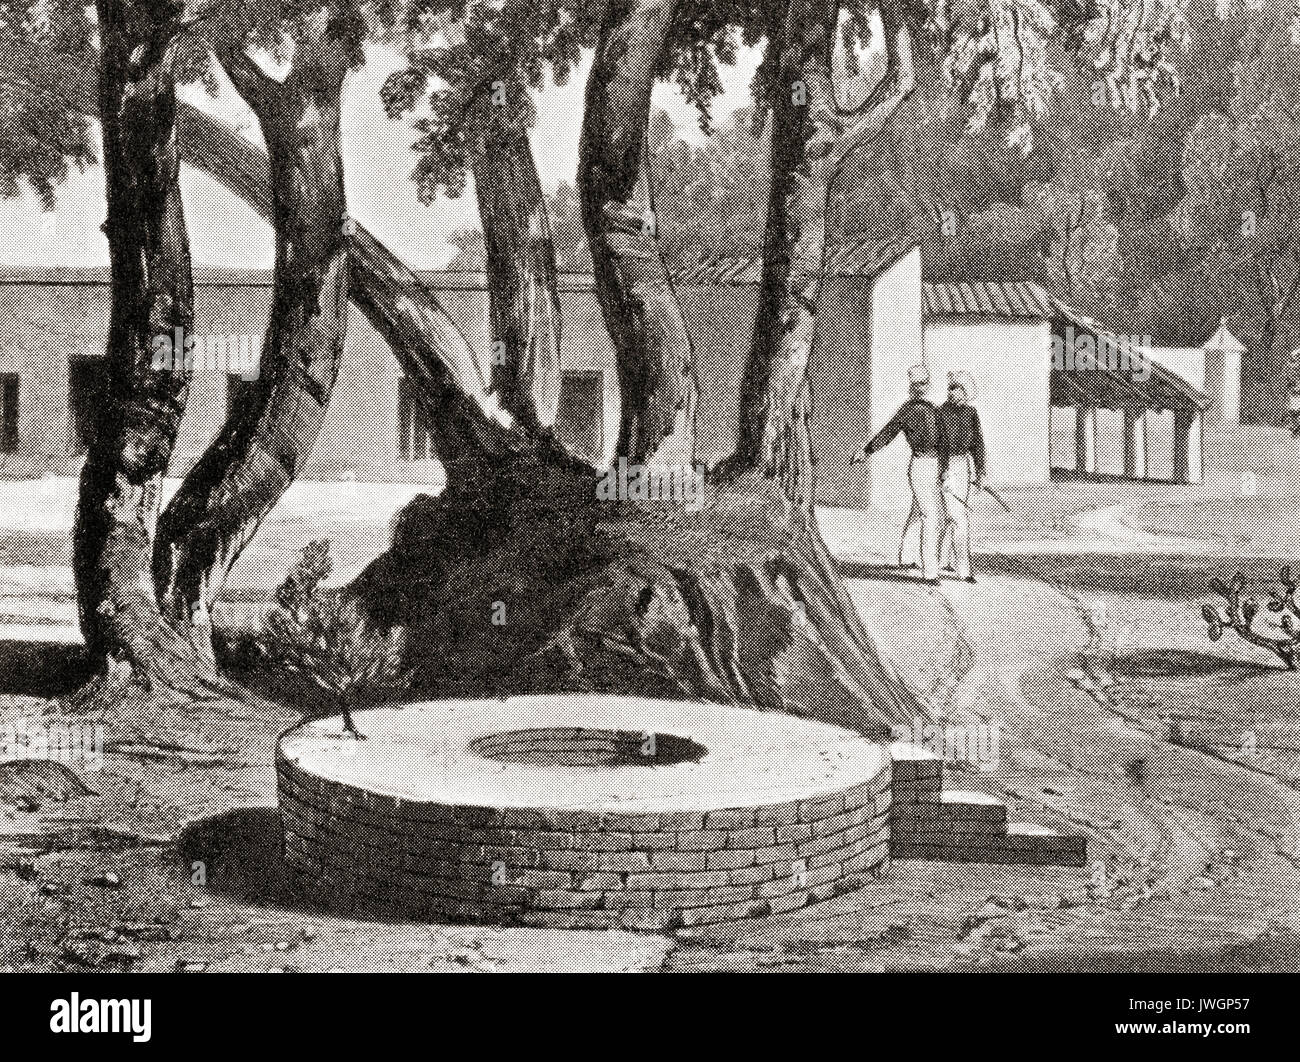 The Well at Cawnpore, India.  The besieged forces of the East India Company, unprepared for an extended siege, surrendered to the rebel forces in return for a safe passage to Allahabad, however their evacuation turned into a massacre, the men were killed and 120 British women and children were murdered and their remains thrown down a well to hide the evidence.  From Hutchinson's History of the Nations, published 1915. Stock Photo